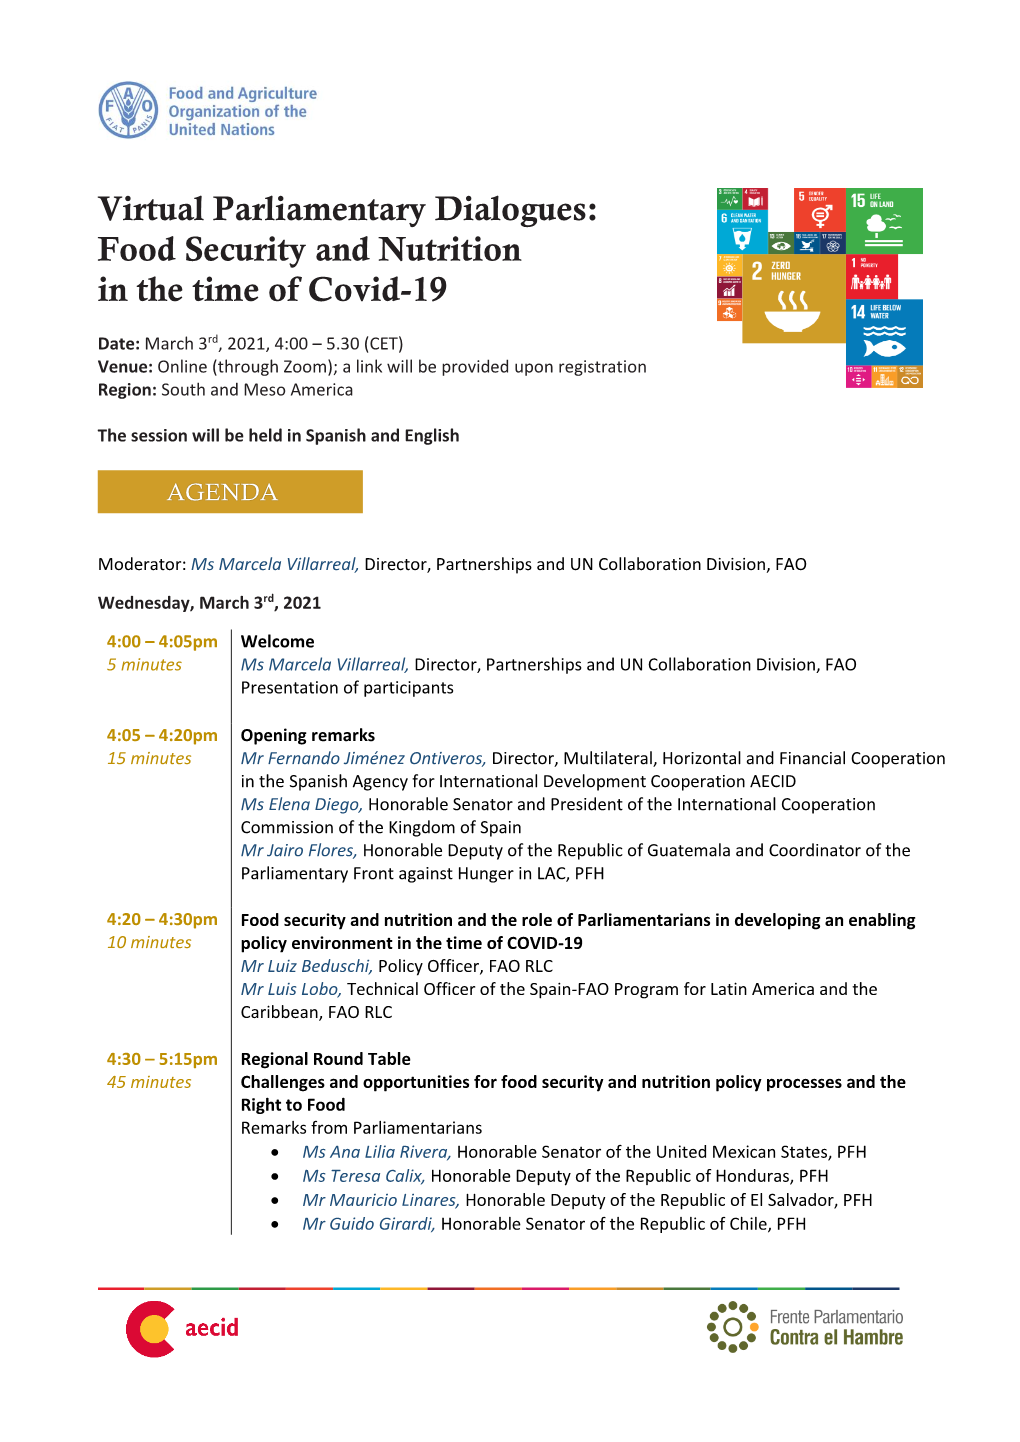 Virtual Parliamentary Dialogues: Food Security and Nutrition in the Time of Covid-19